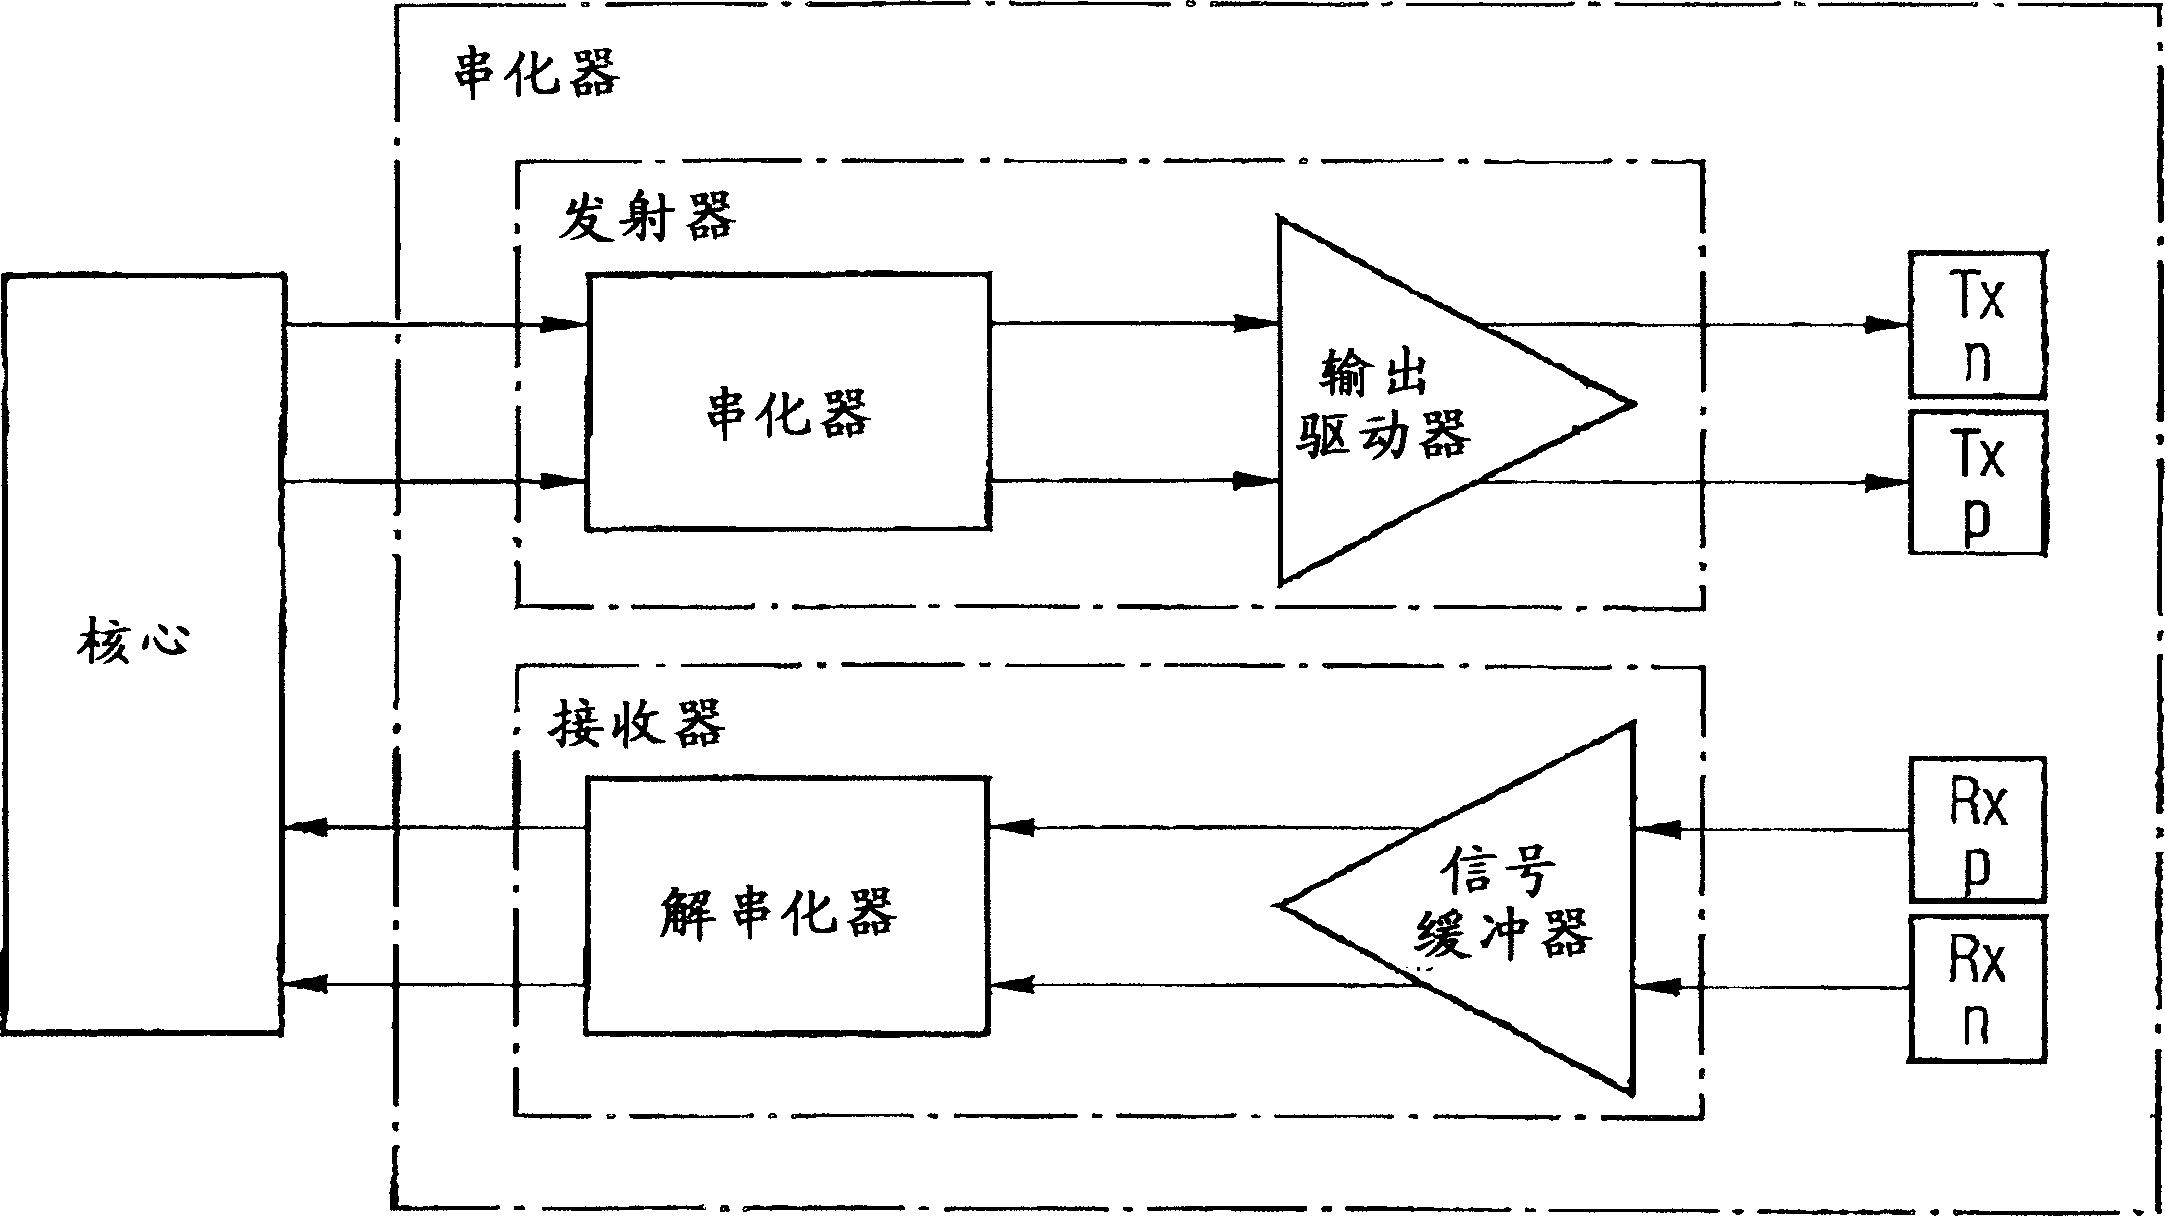 Test switching circuit for a high speed data interface